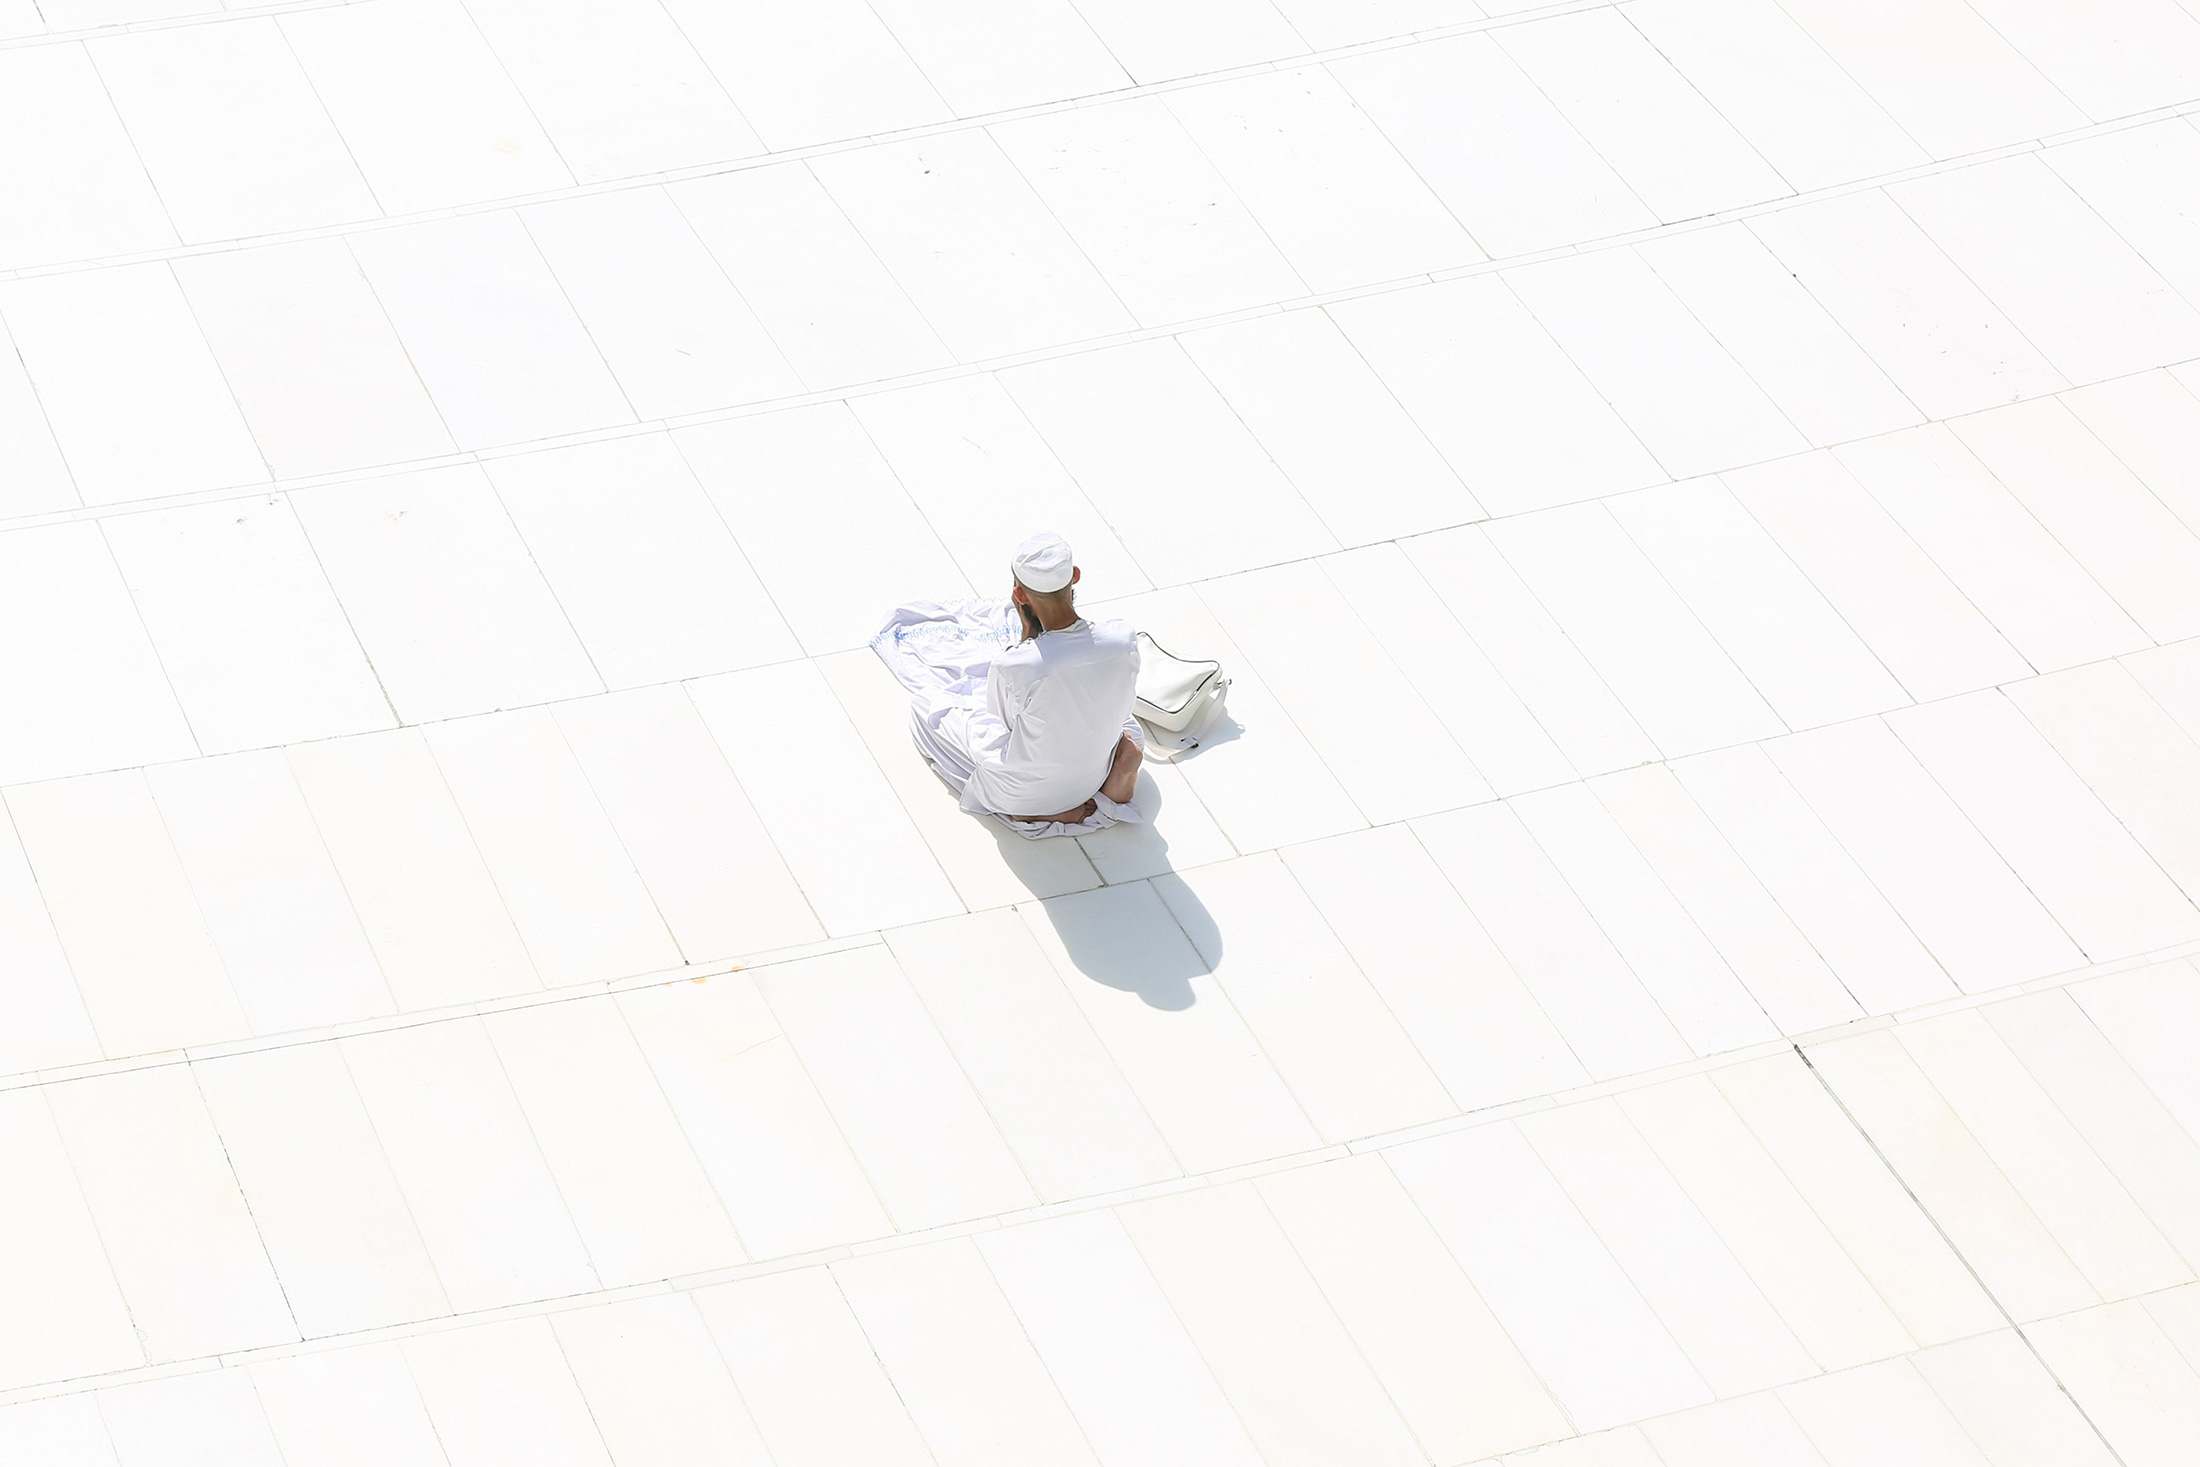 A Muslim worshipper prays near the Kaaba in Mecca’s Grand Mosque, Islam’s holiest site, on March 7.